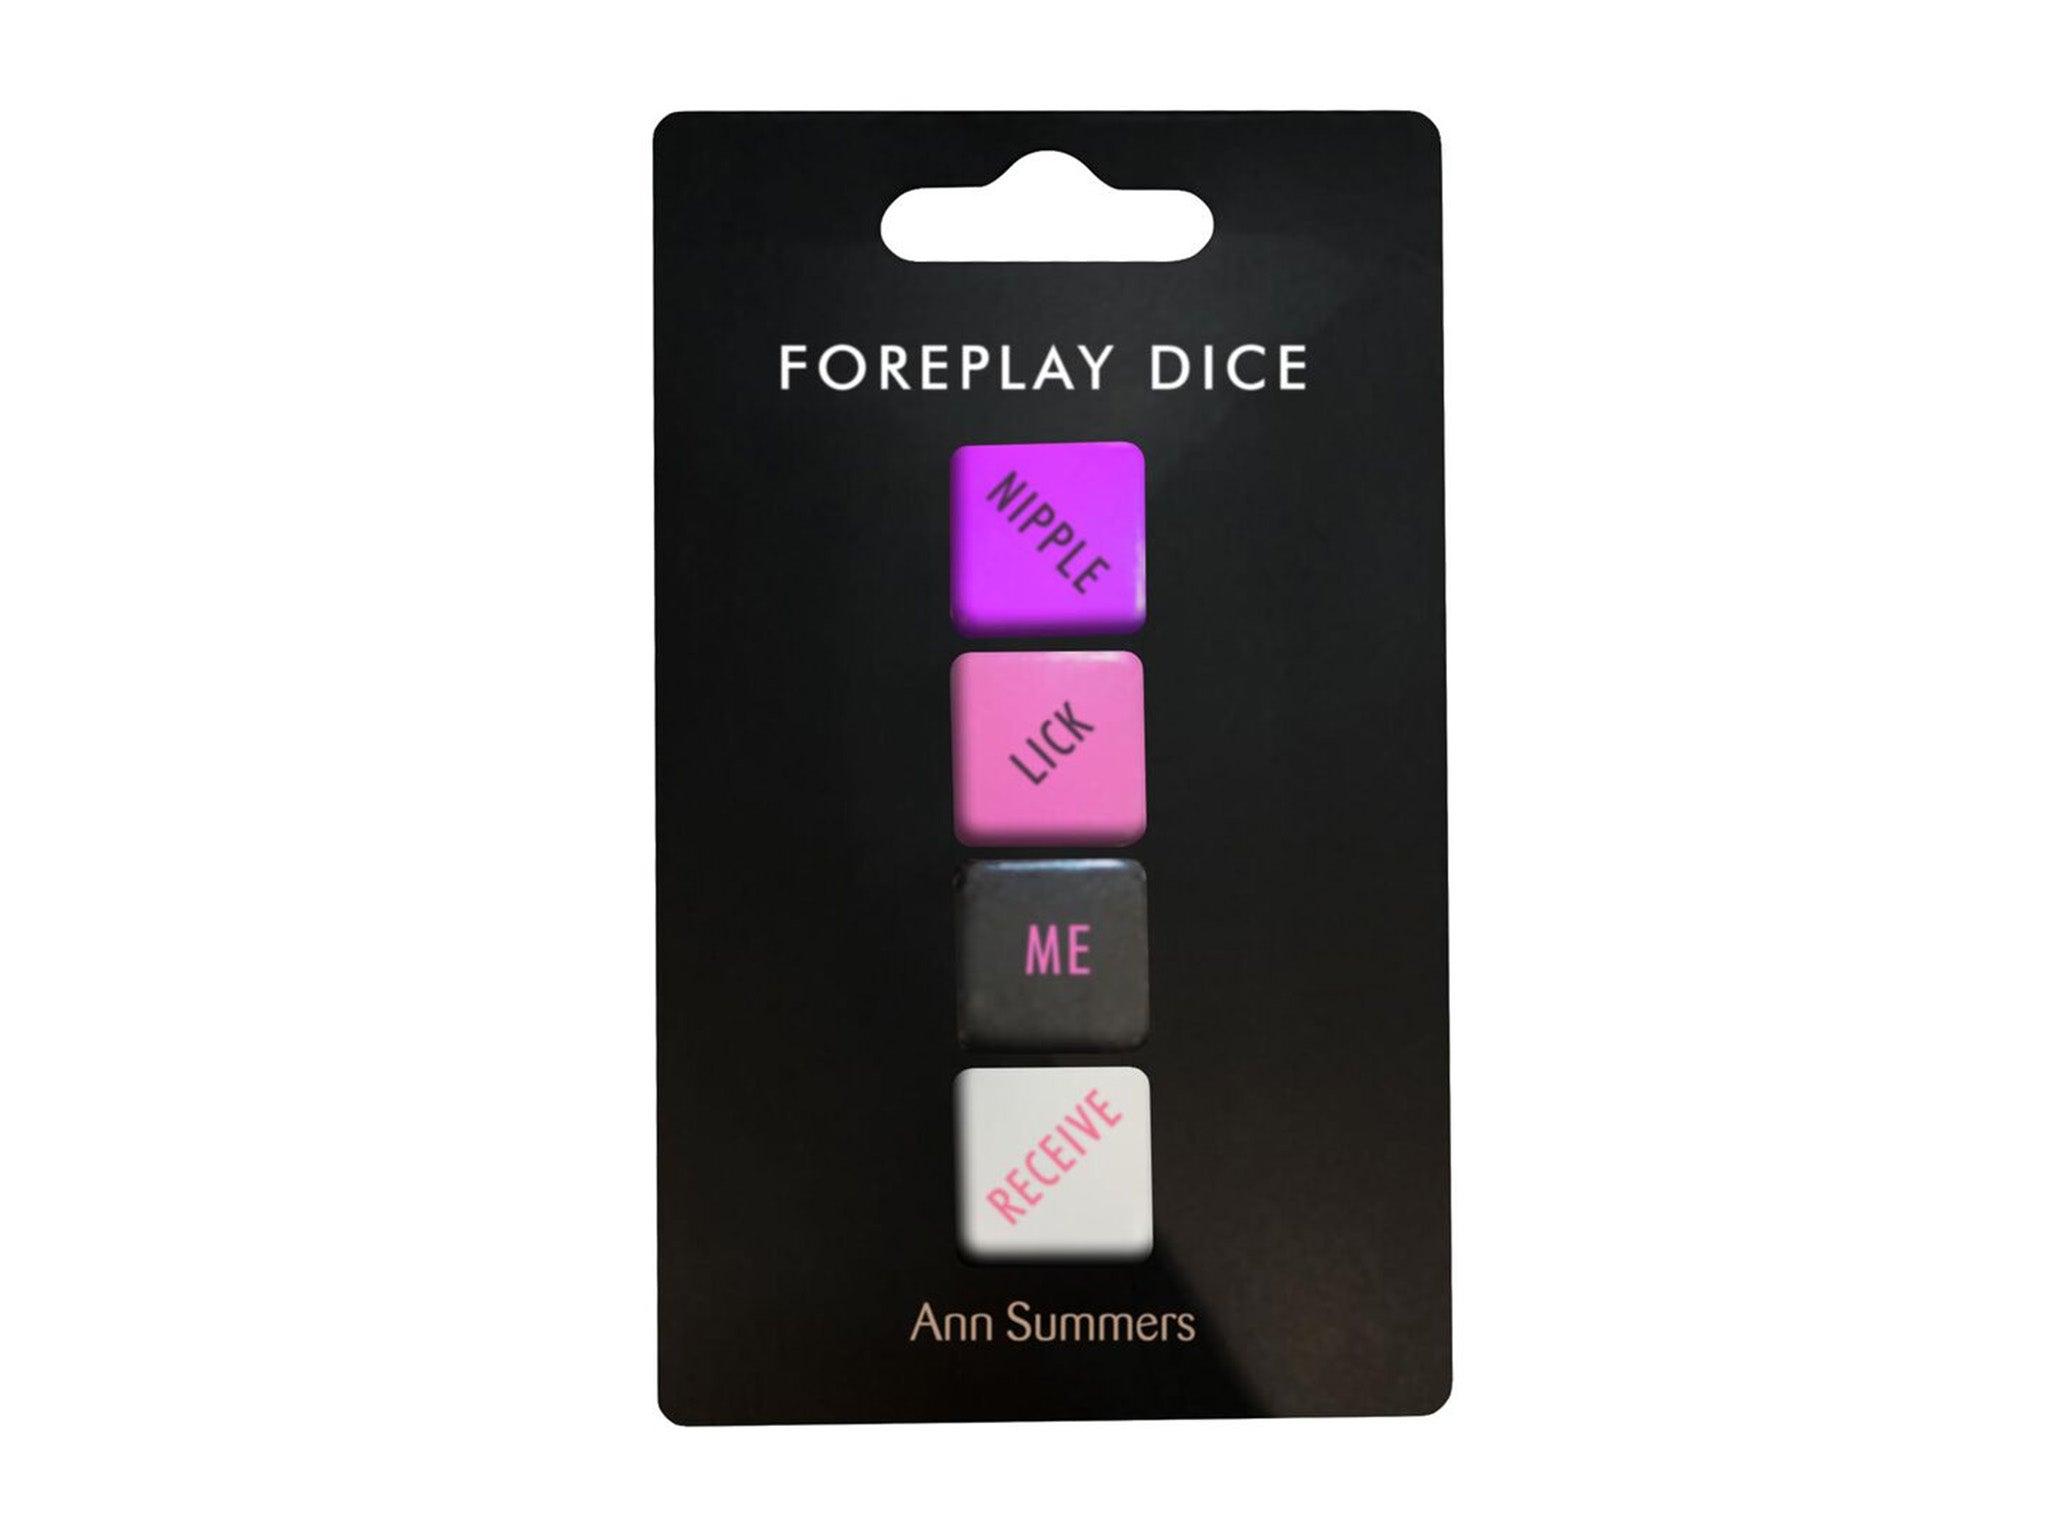 Ann Summers foreplay dice